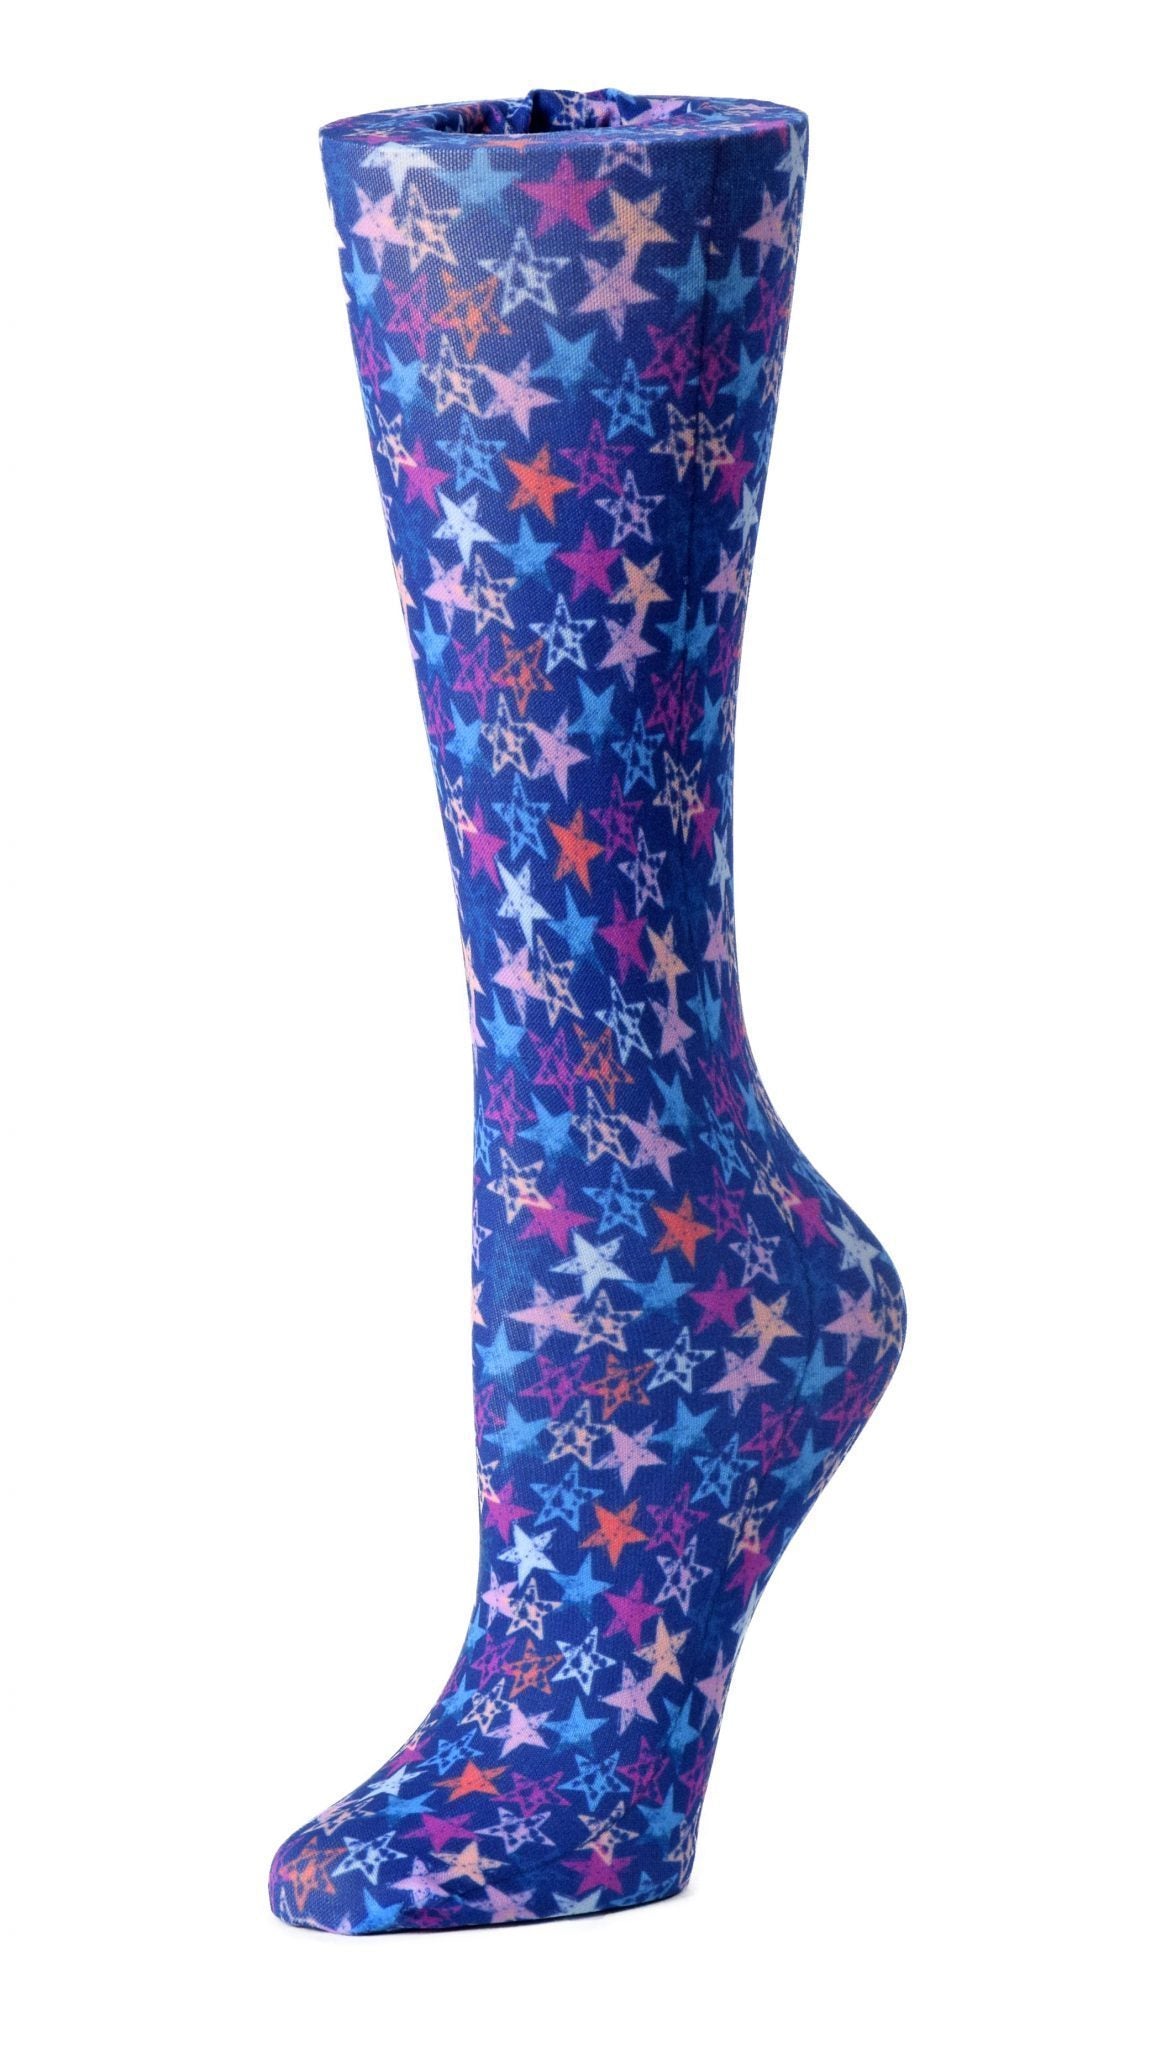 Cutieful Moderate Compression Socks 10-18 MMhg Wide Calf Knit Print Pattern Abstract Stars at Parker's Clothing and Shoes.